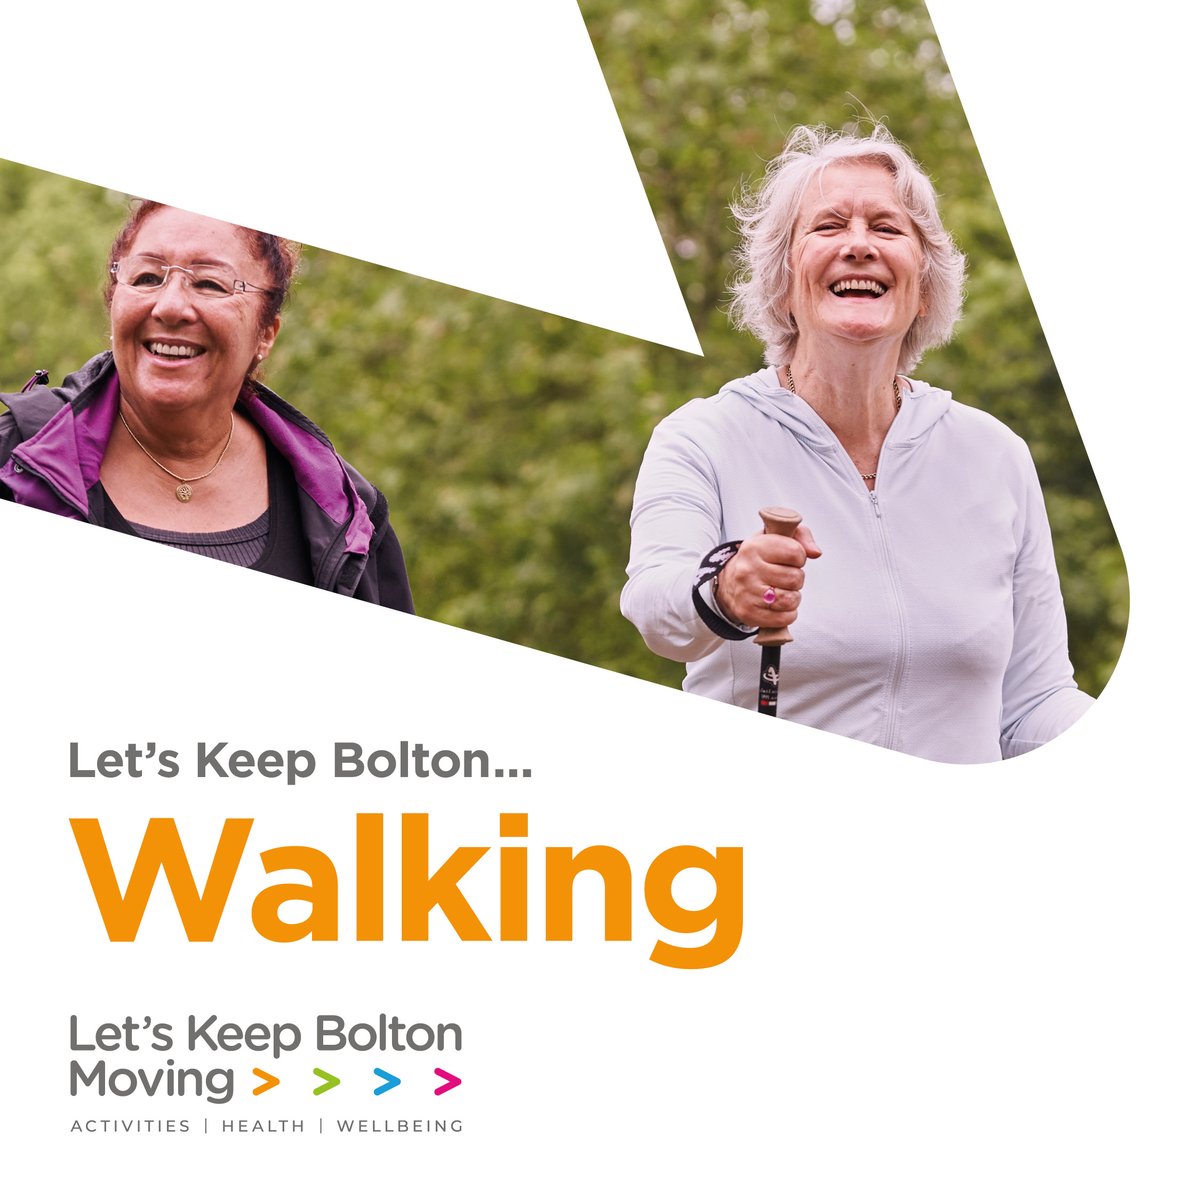 Fancy a walk after lunch? Join us as we take a medium intensity stroll through Moss Bank park, all ages & abilities welcome. Meet at the parks main car park, 1pm 🕐 Cost: absolutely free! See you there👋 Want to help out? Volunteers are welcome, get in touch to find out more.